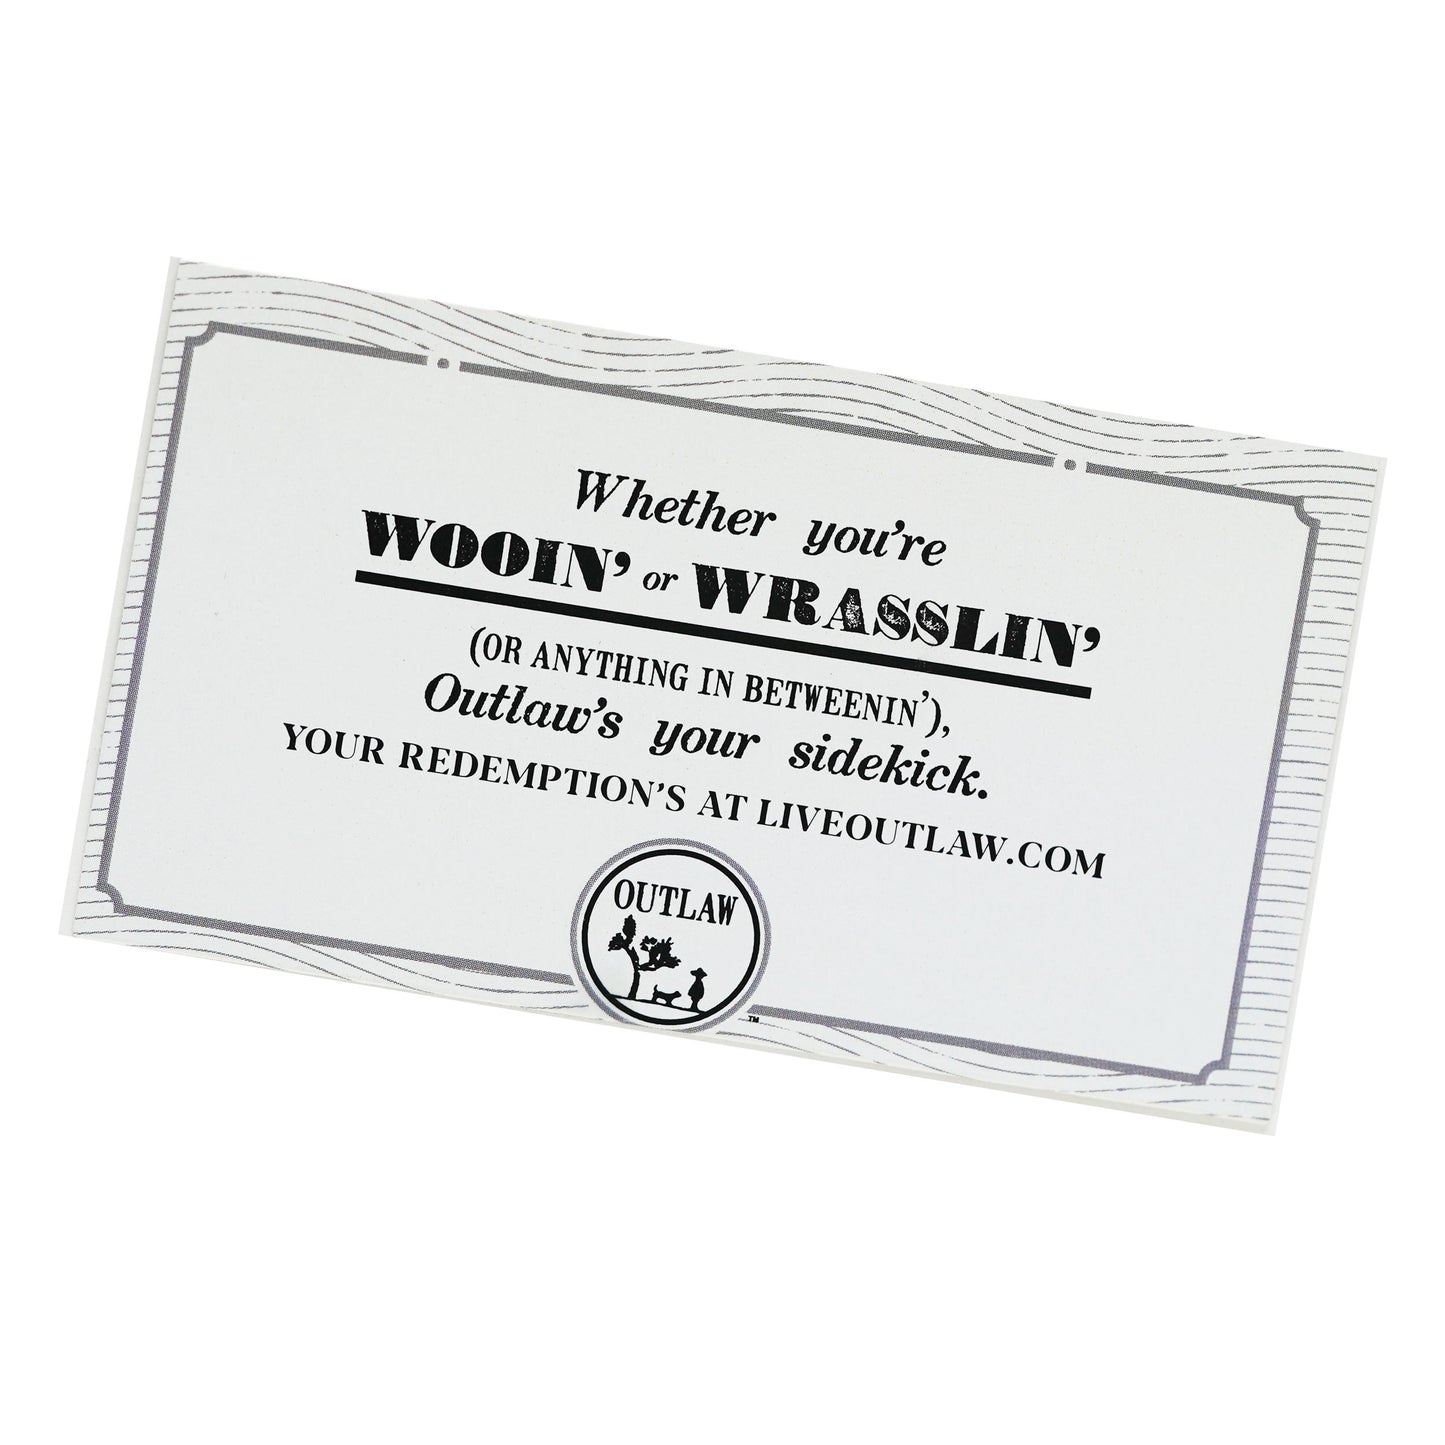 The Outlaw Gift Card